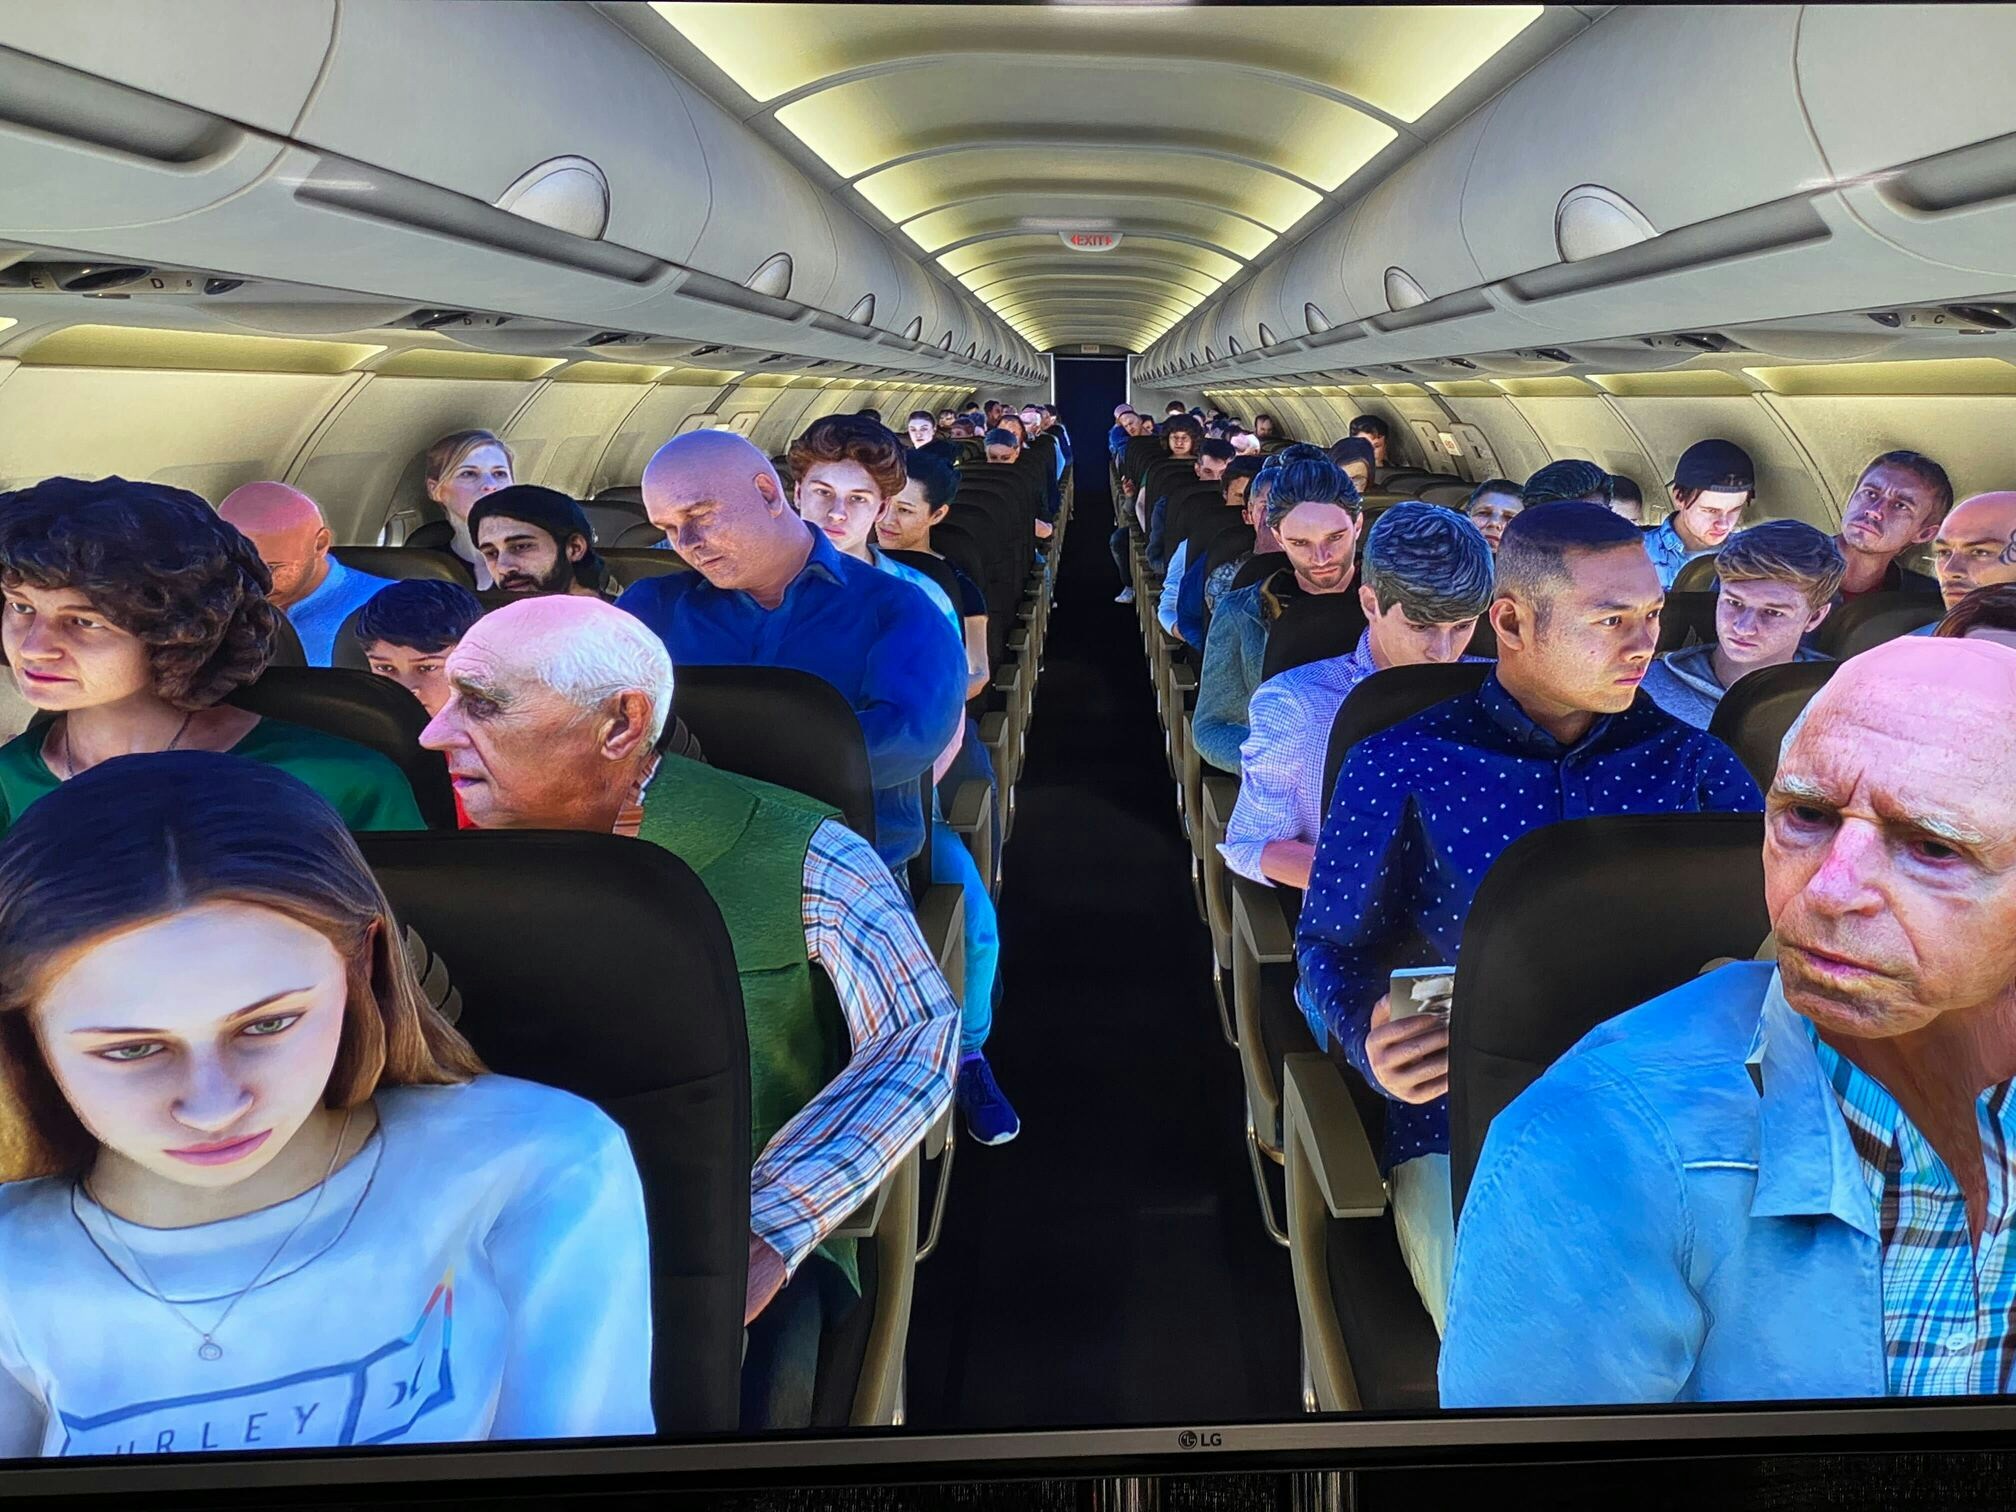 FSDreamTeam Bringing Animated 3D Passengers to Inside Aircraft with GSX Pro